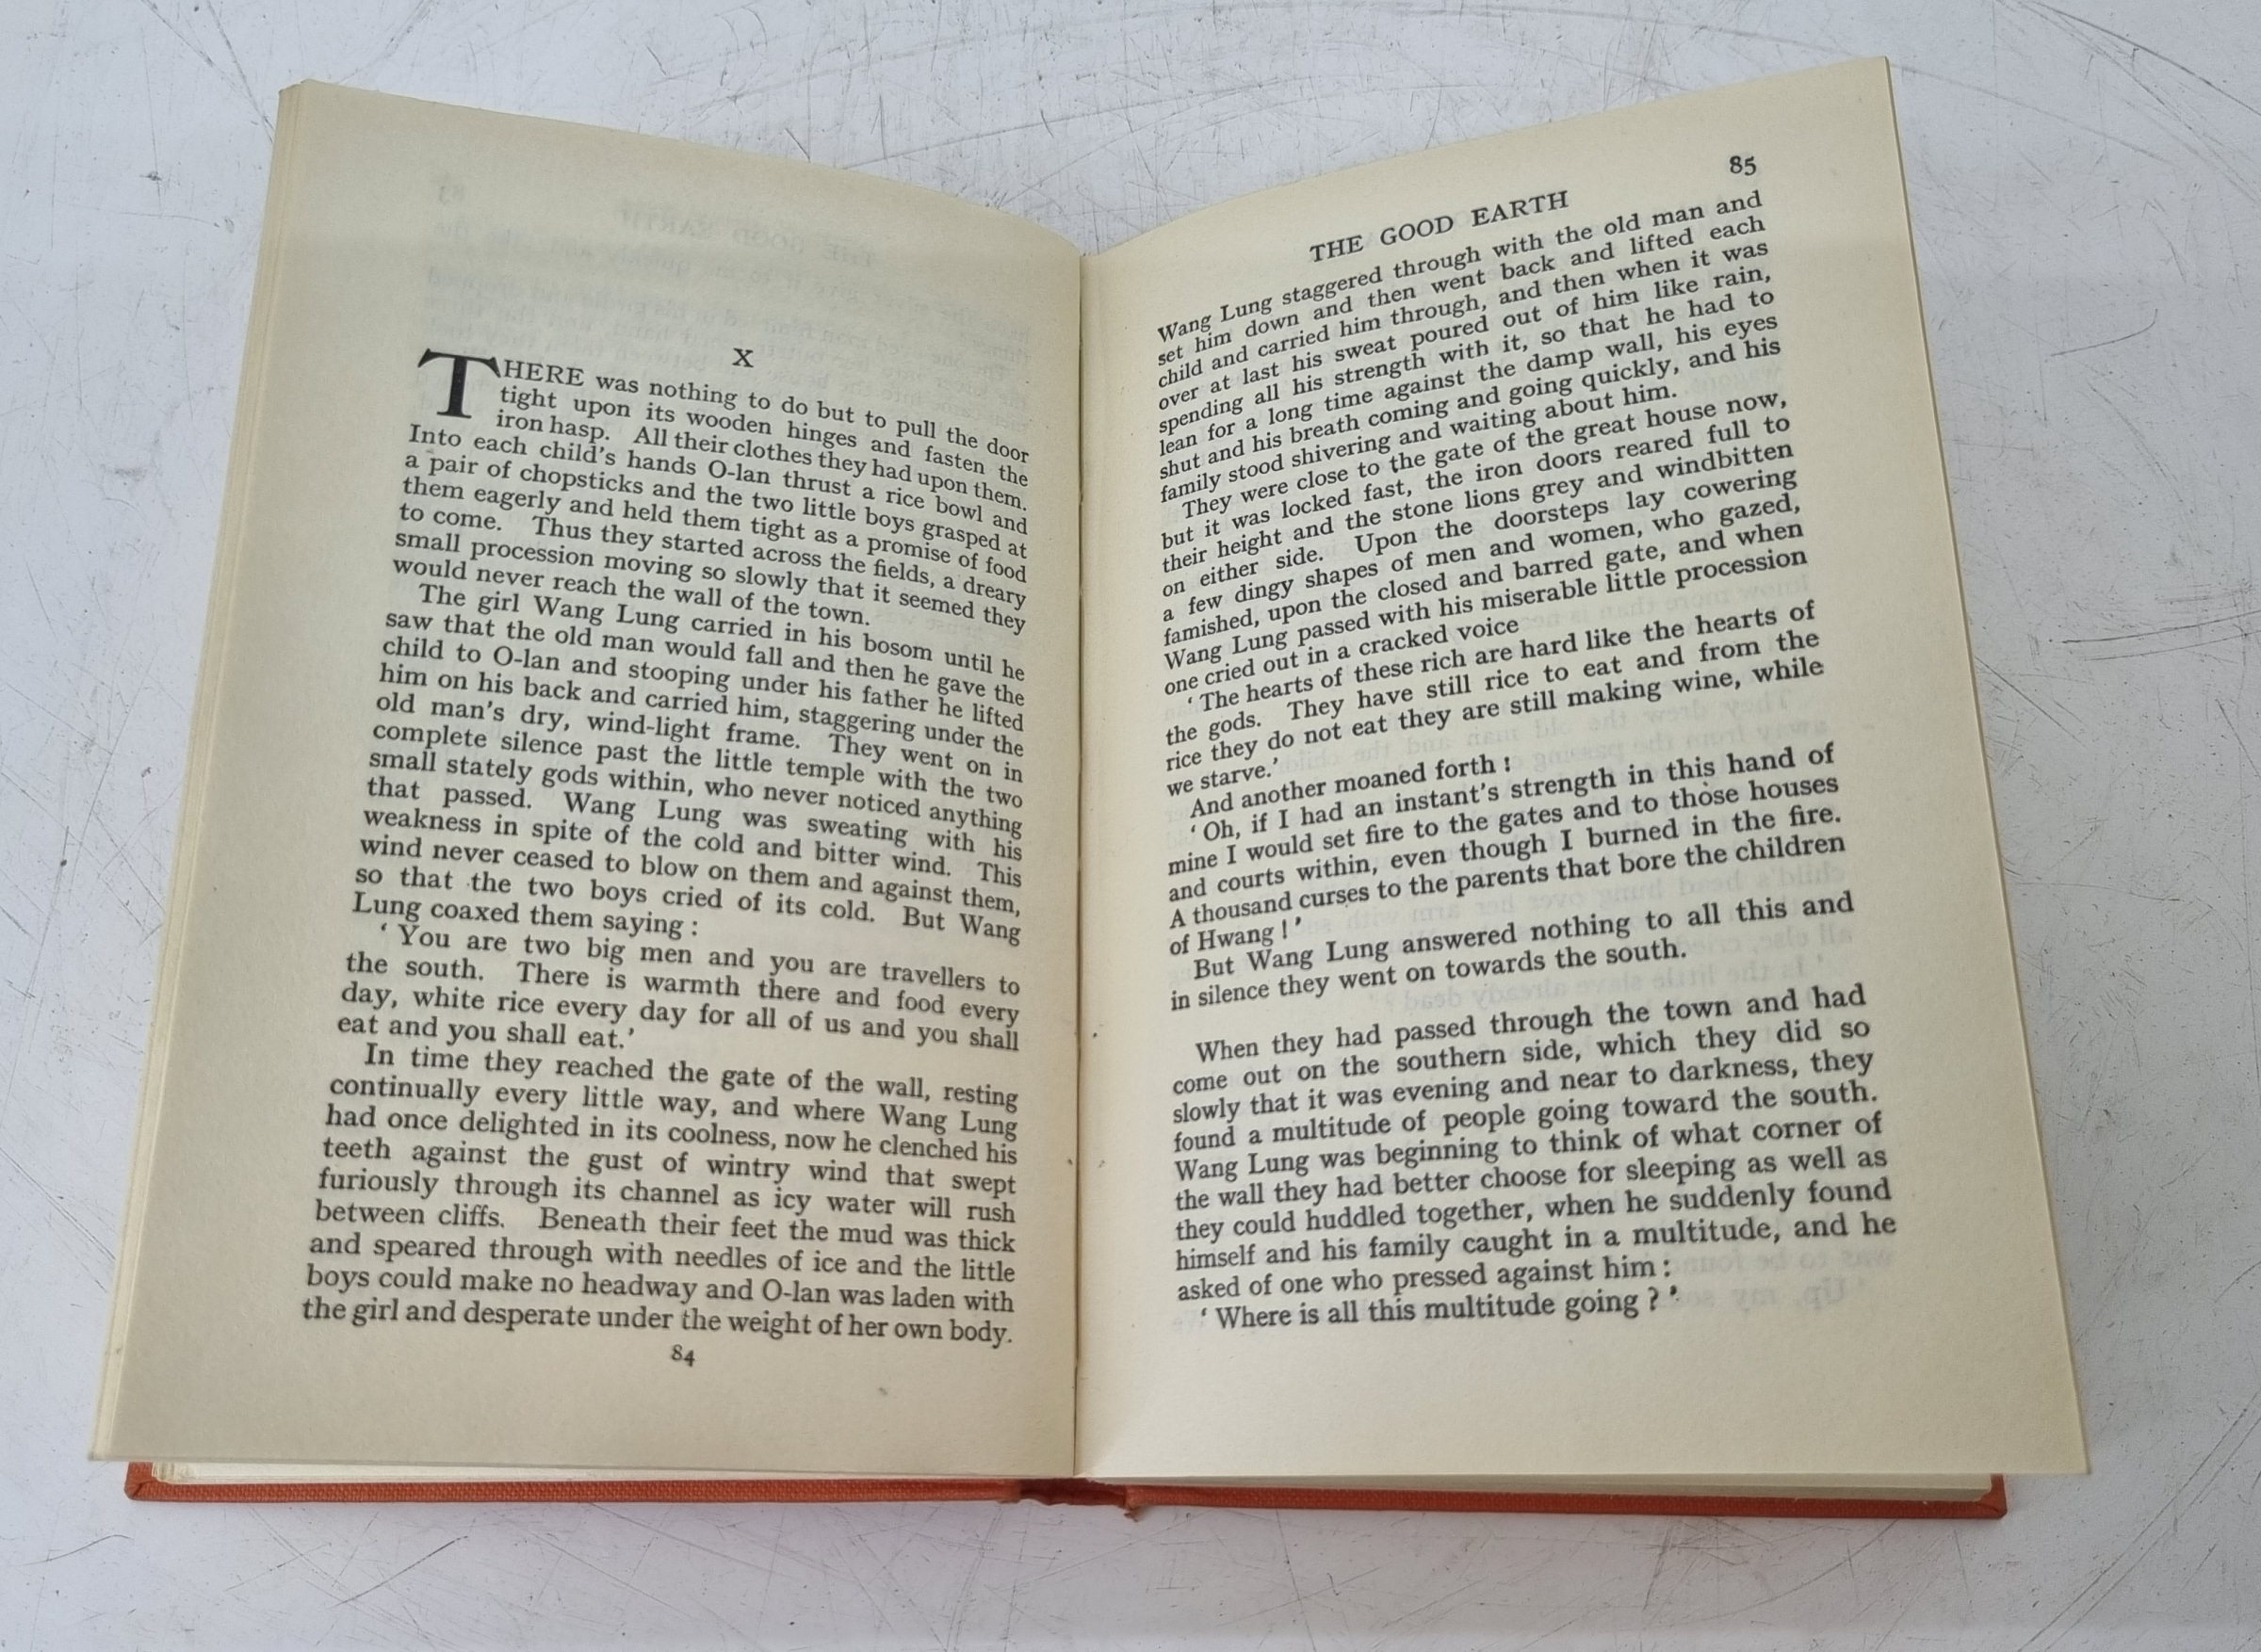 The Good Earth by Pearl S Buck - Published Norwich 1955, The Countryside Companion by Tom Stephenson - Image 9 of 13